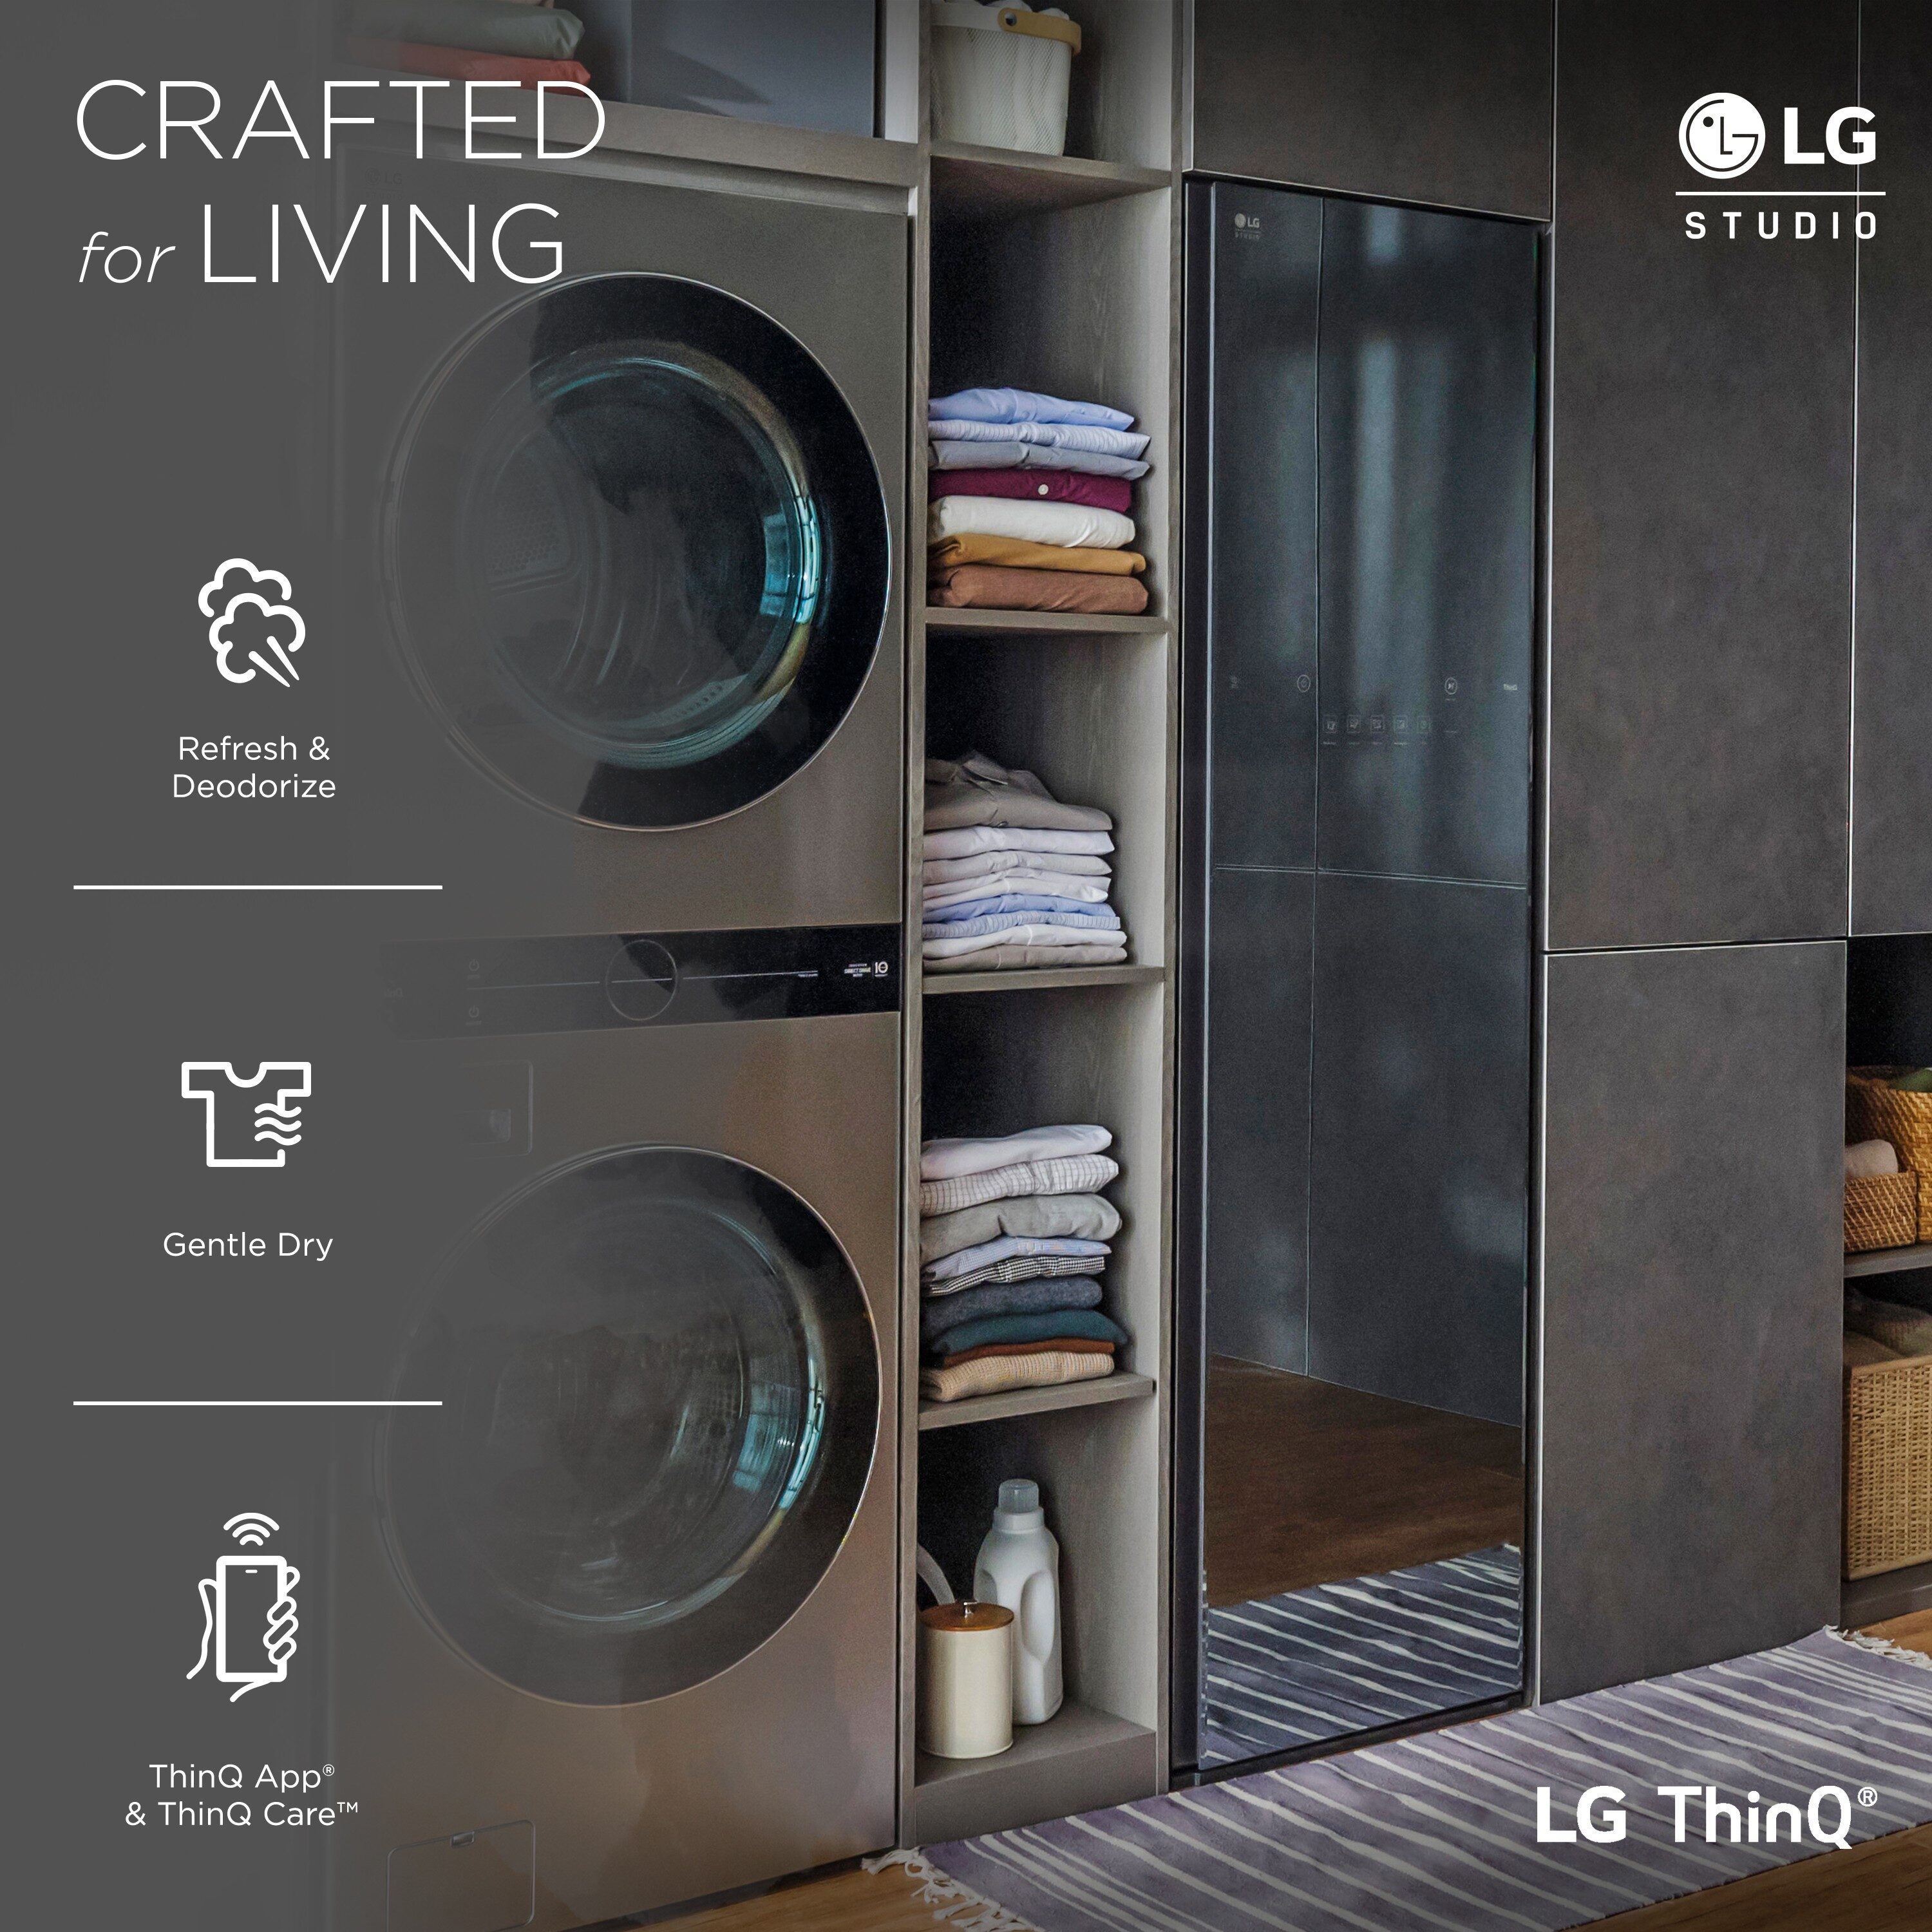 LG STUDIO Styler - Refresh Garments in Minutes with Smart wi-fi Enabled  Steam Clothing Care System - S5MSB